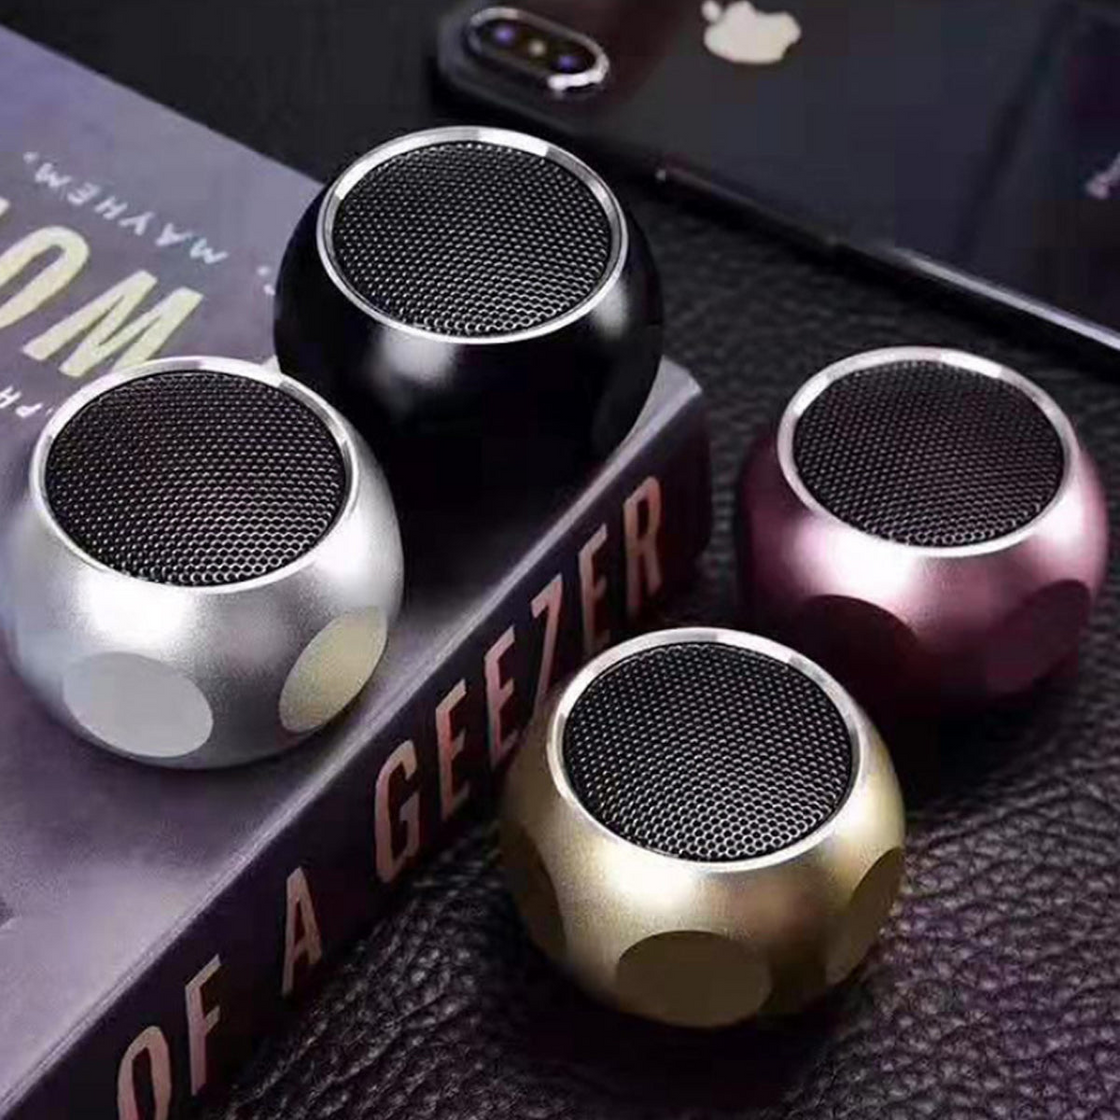 Big Sound Mini Speakers In 5 Colors - Portable Bluetooth Speakers with Clear Sound